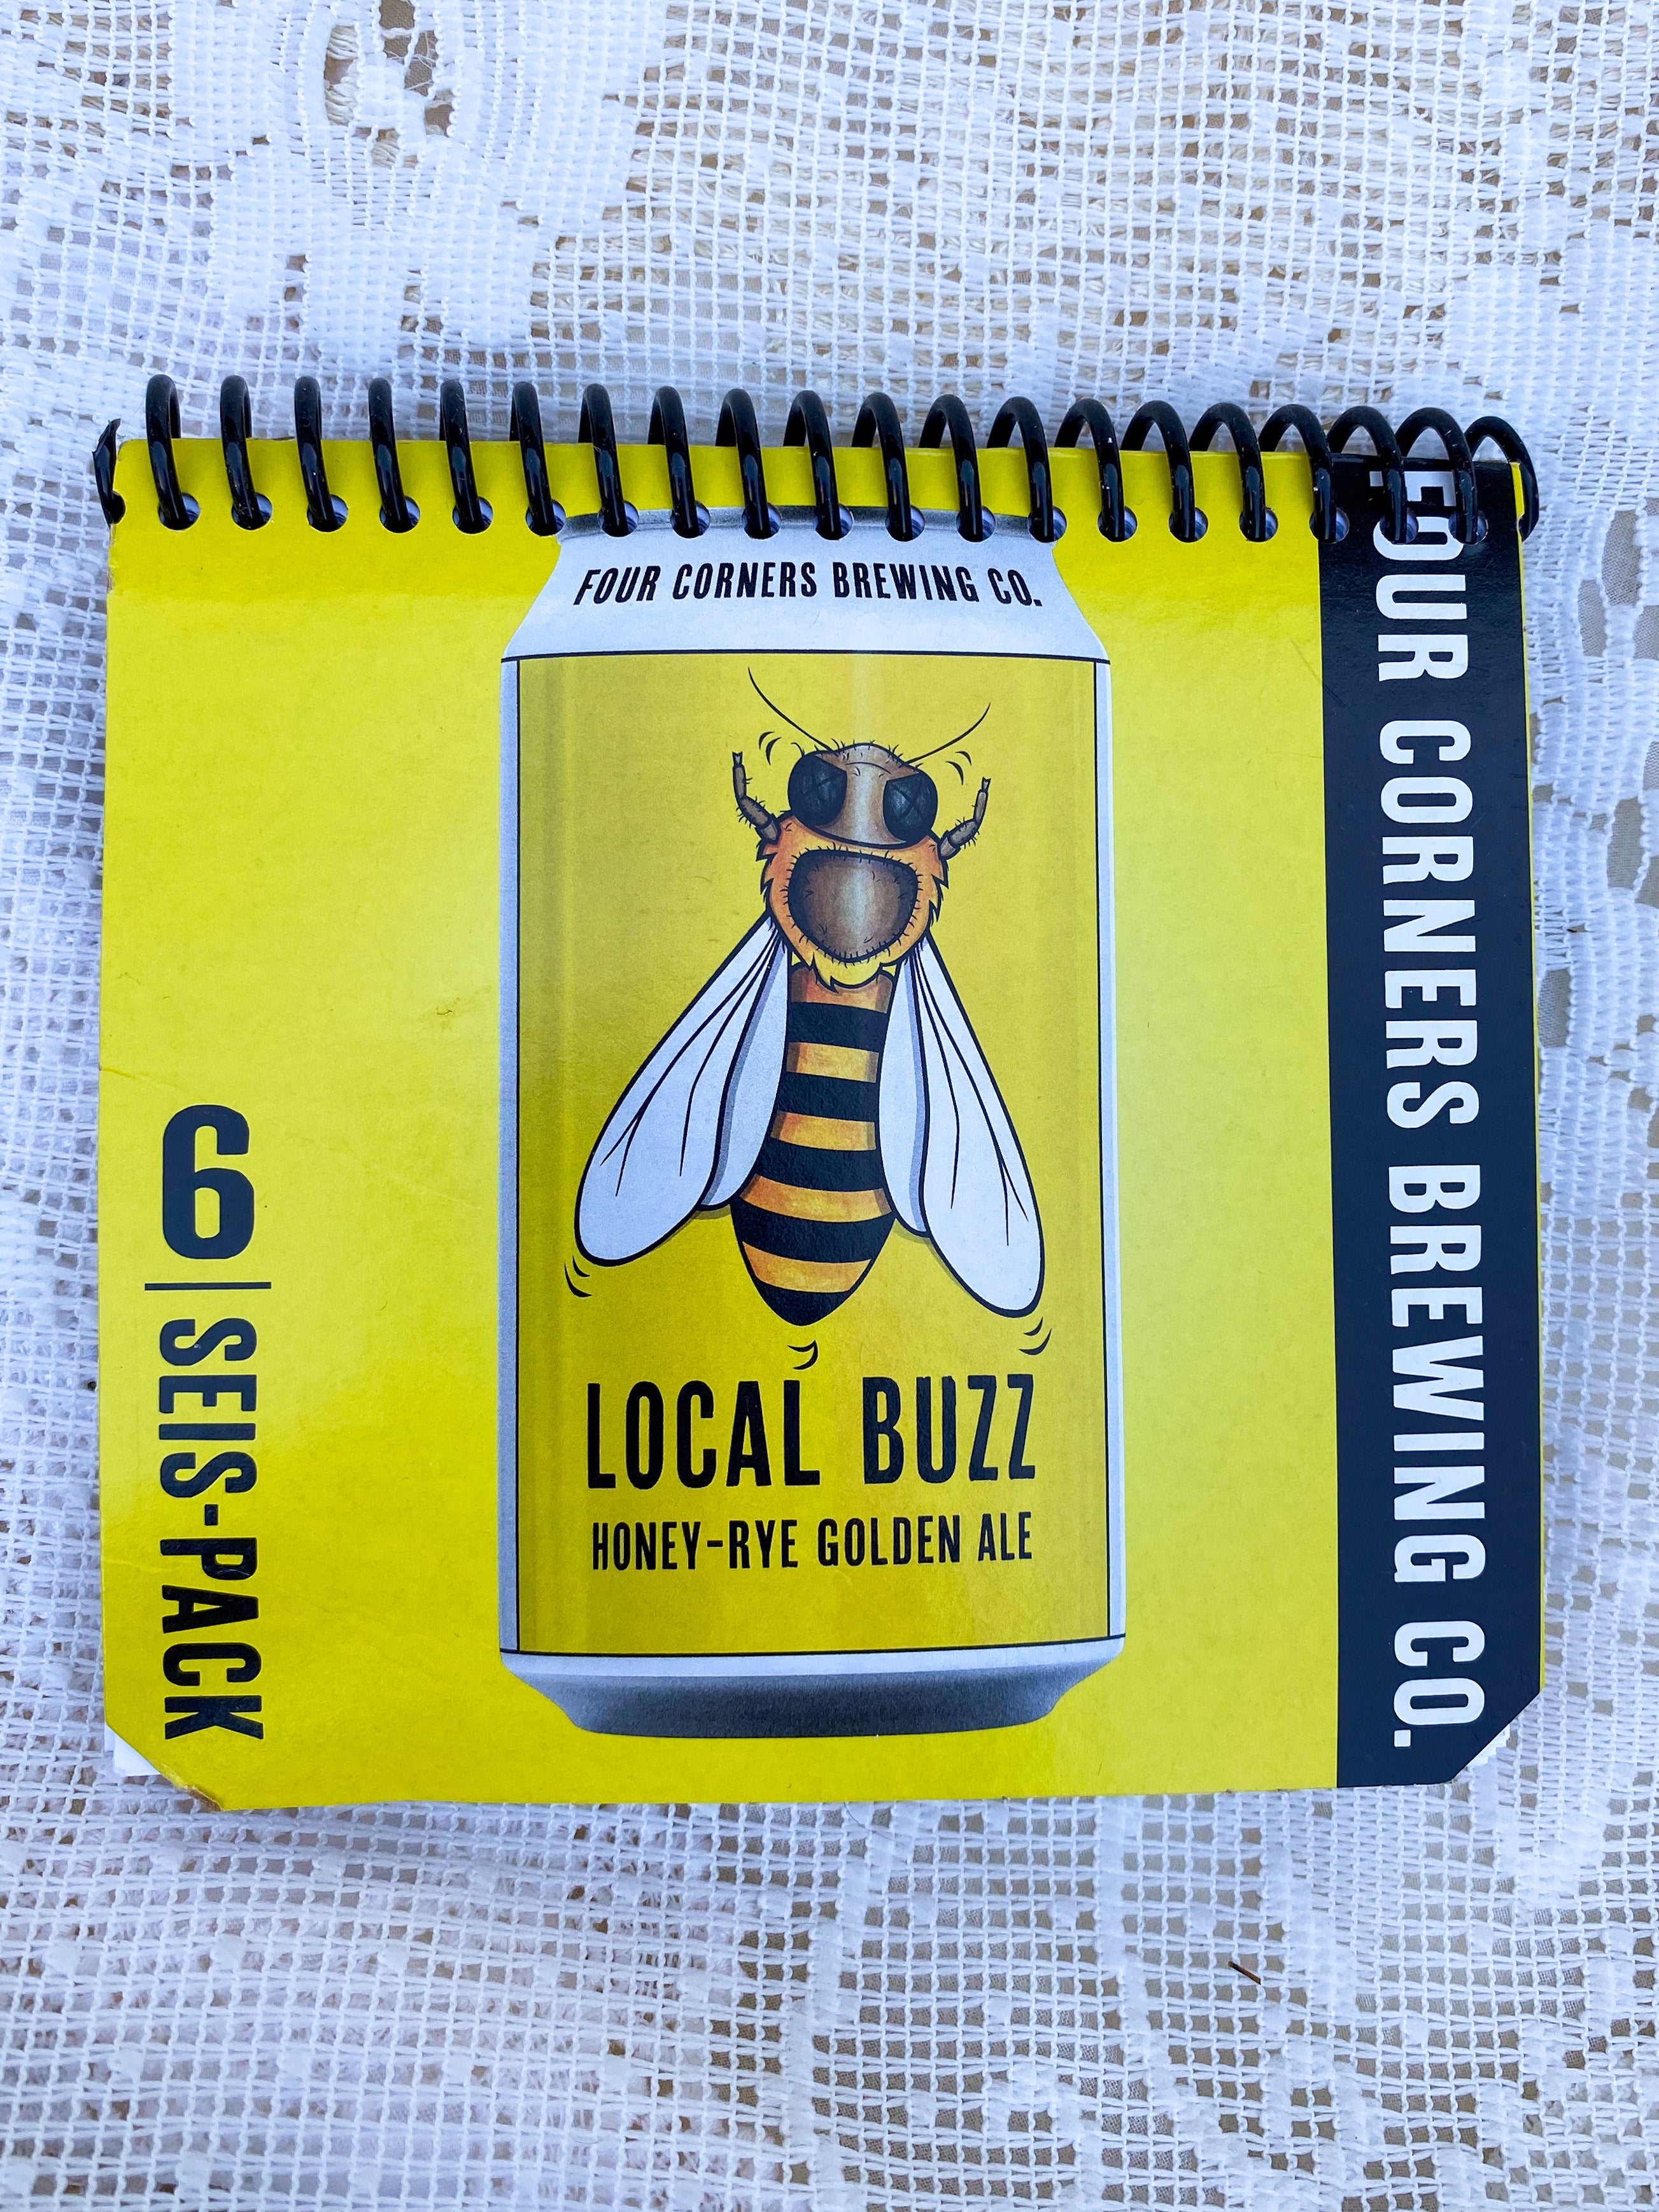 Local Buzz by Four Corners Brewing Co. Recycled Beer Carton Notebook